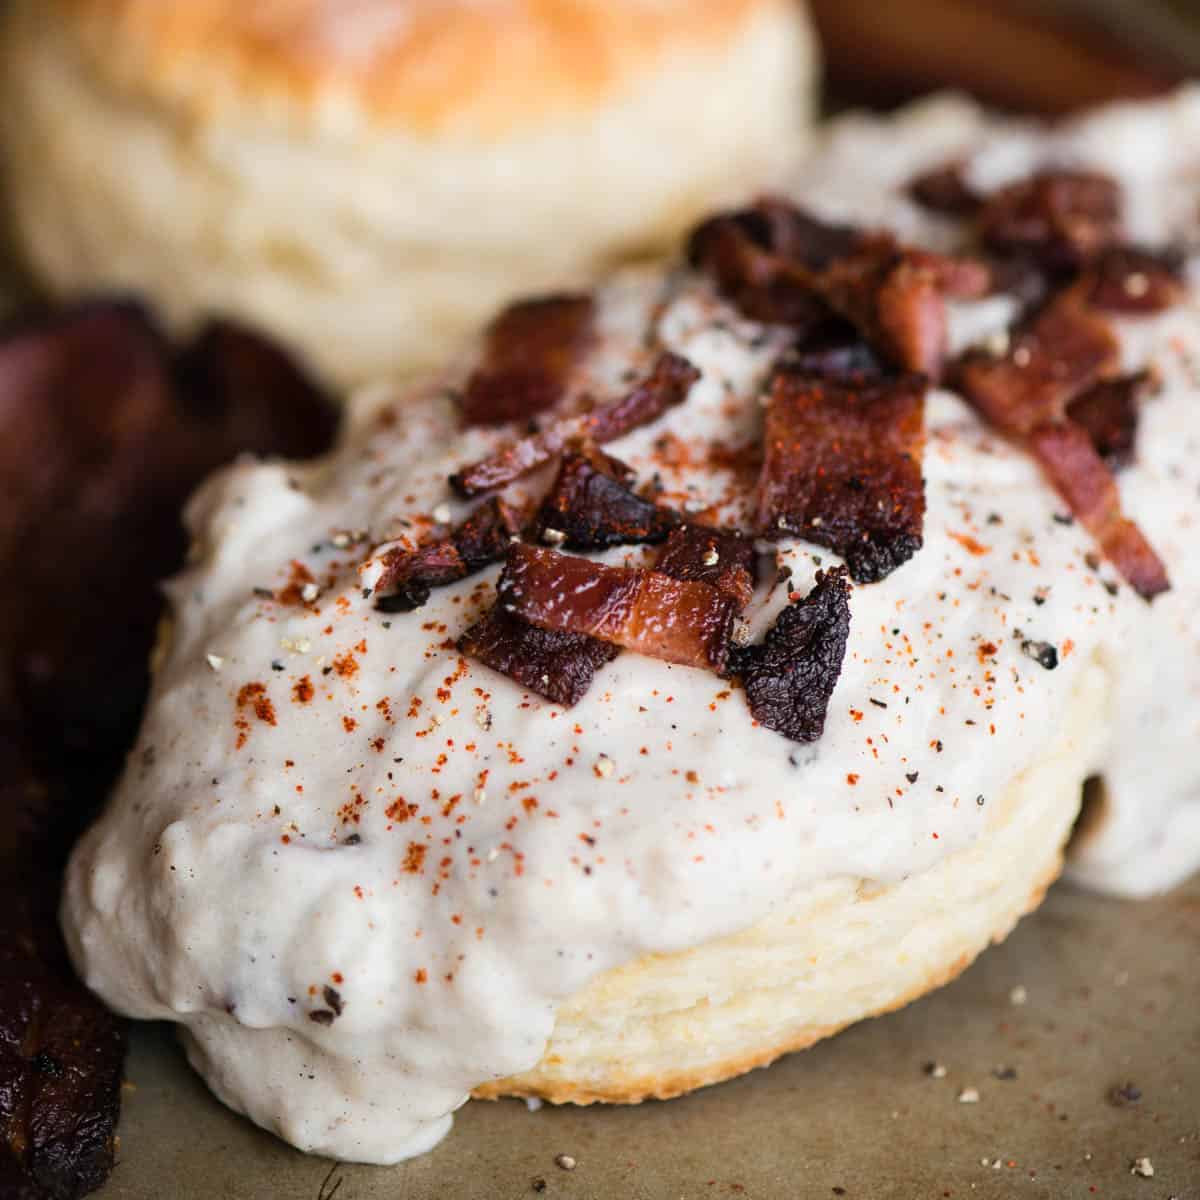 Twenty One Uses For Bacon Grease